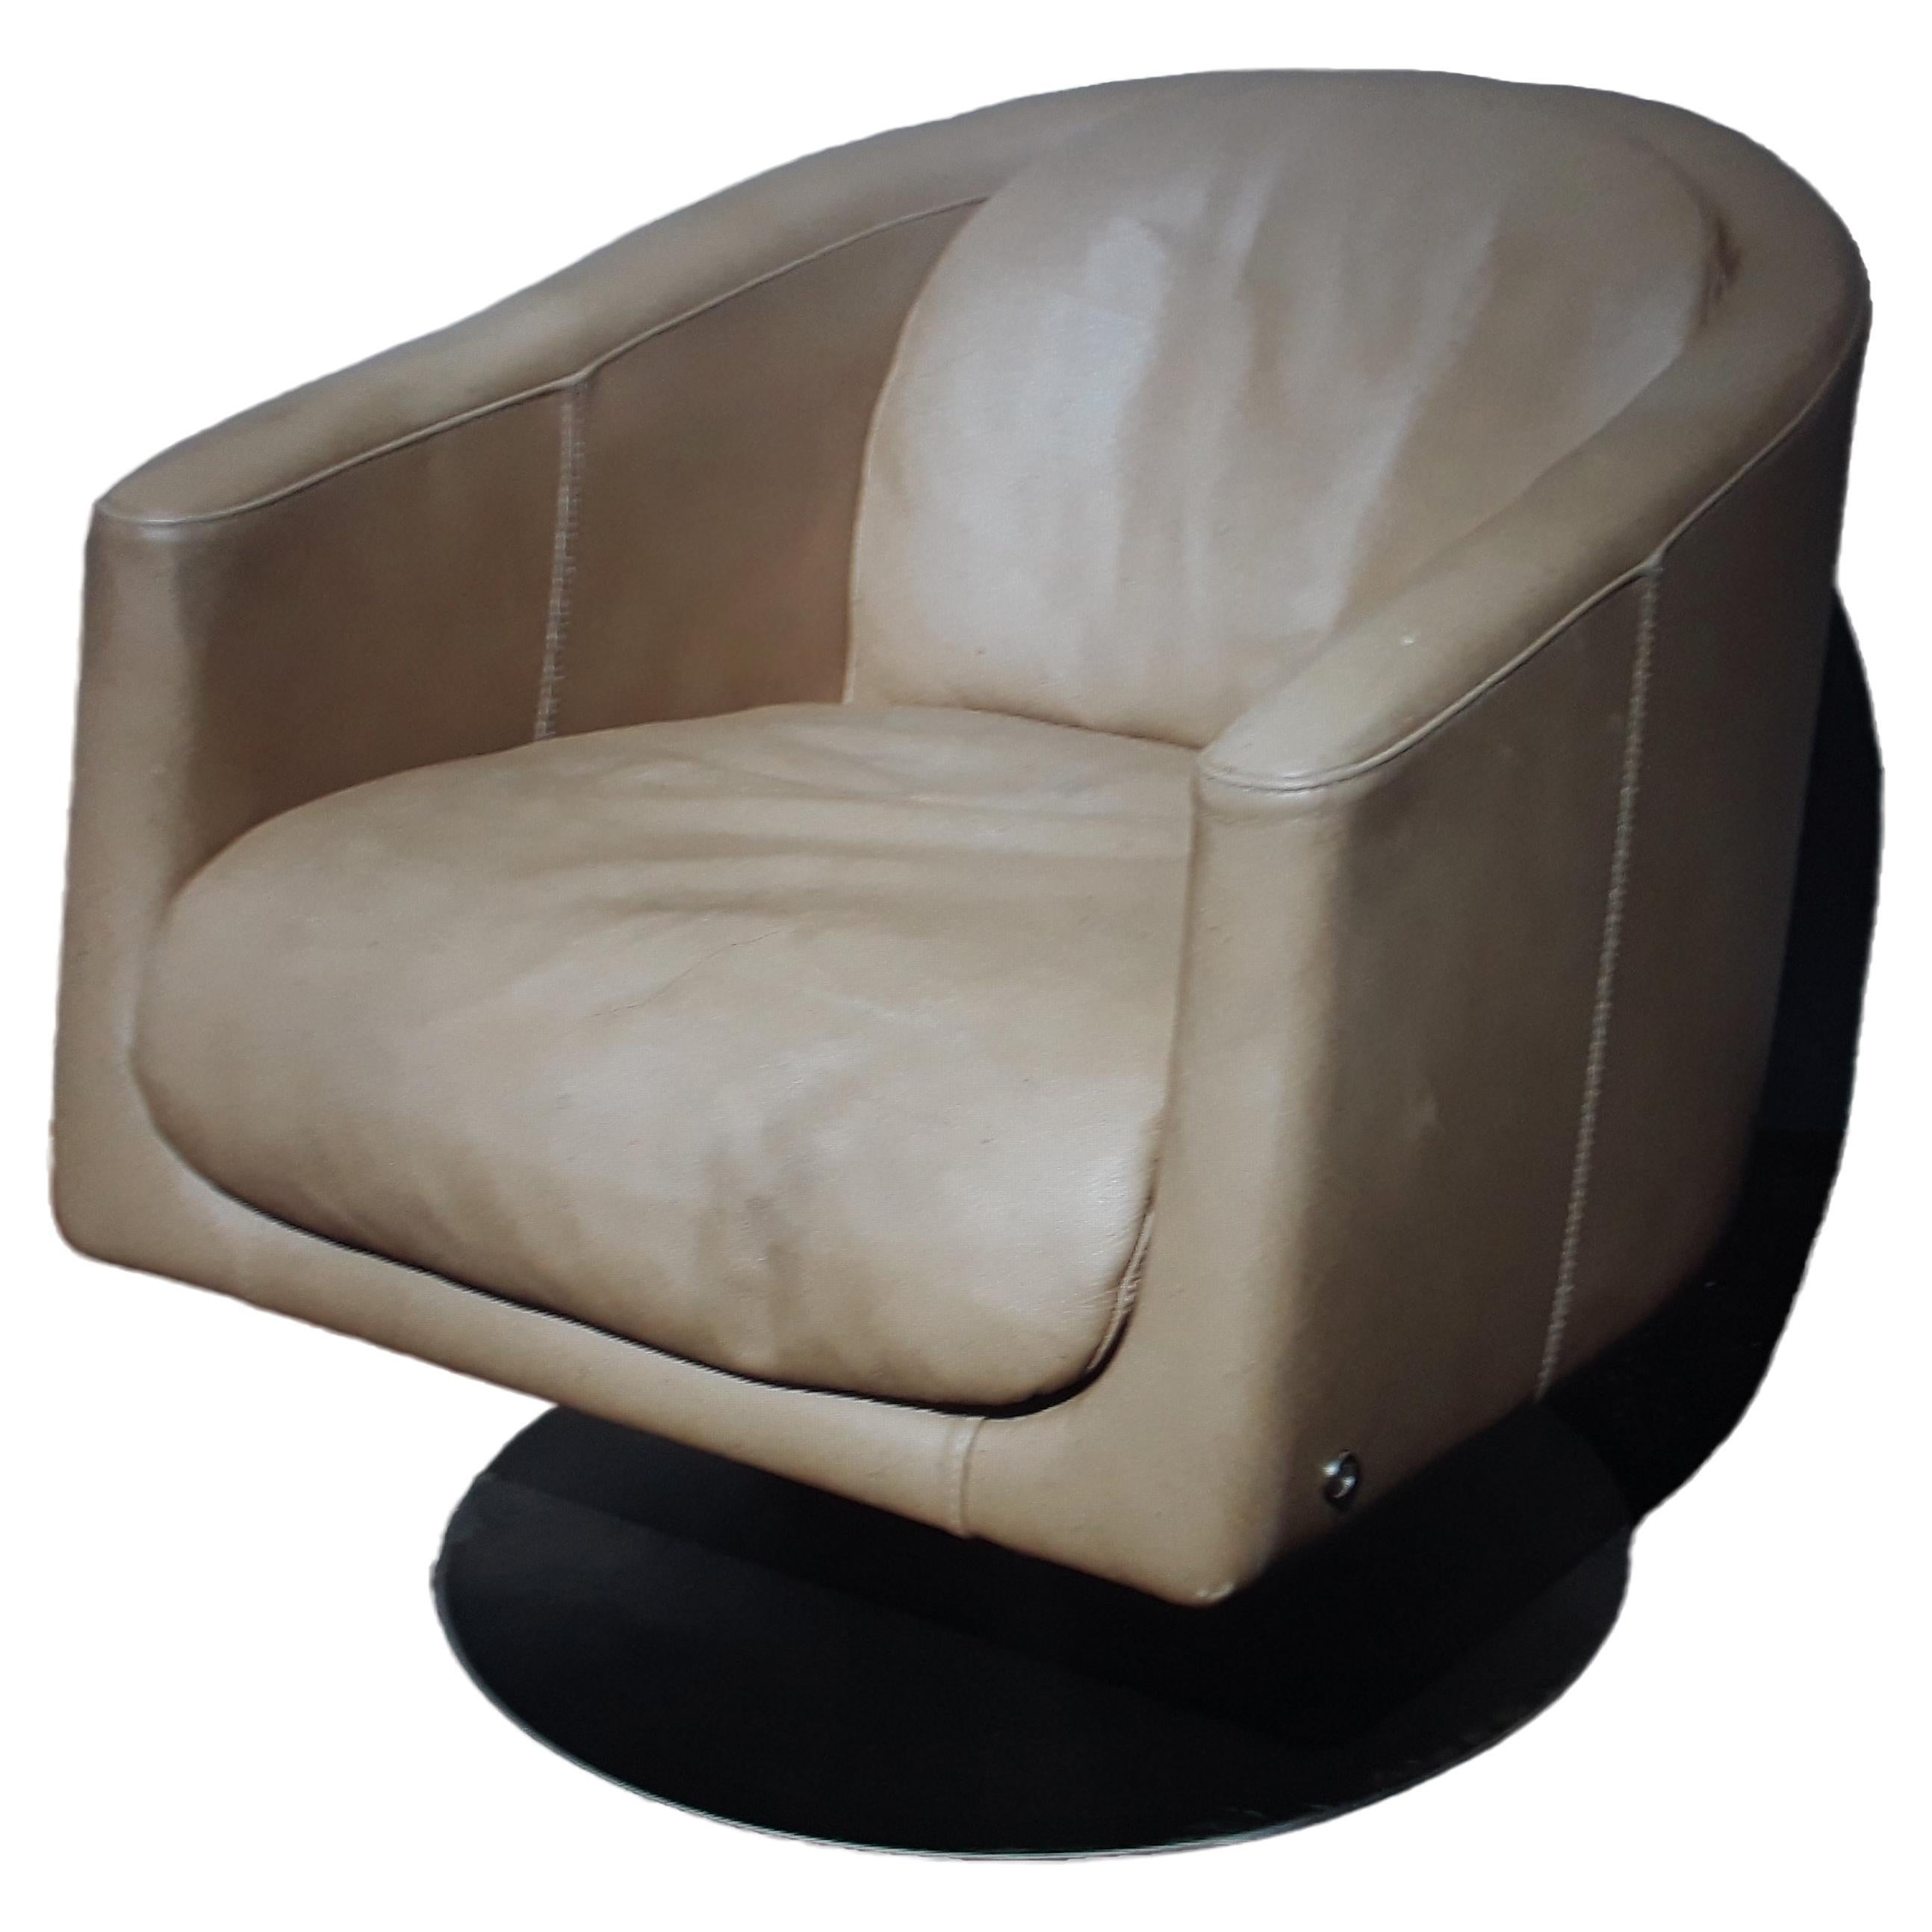 c1960's Art Deco Leather Swivel Club Chair by Natuzzi, Italy. Very high quality Club Chair.